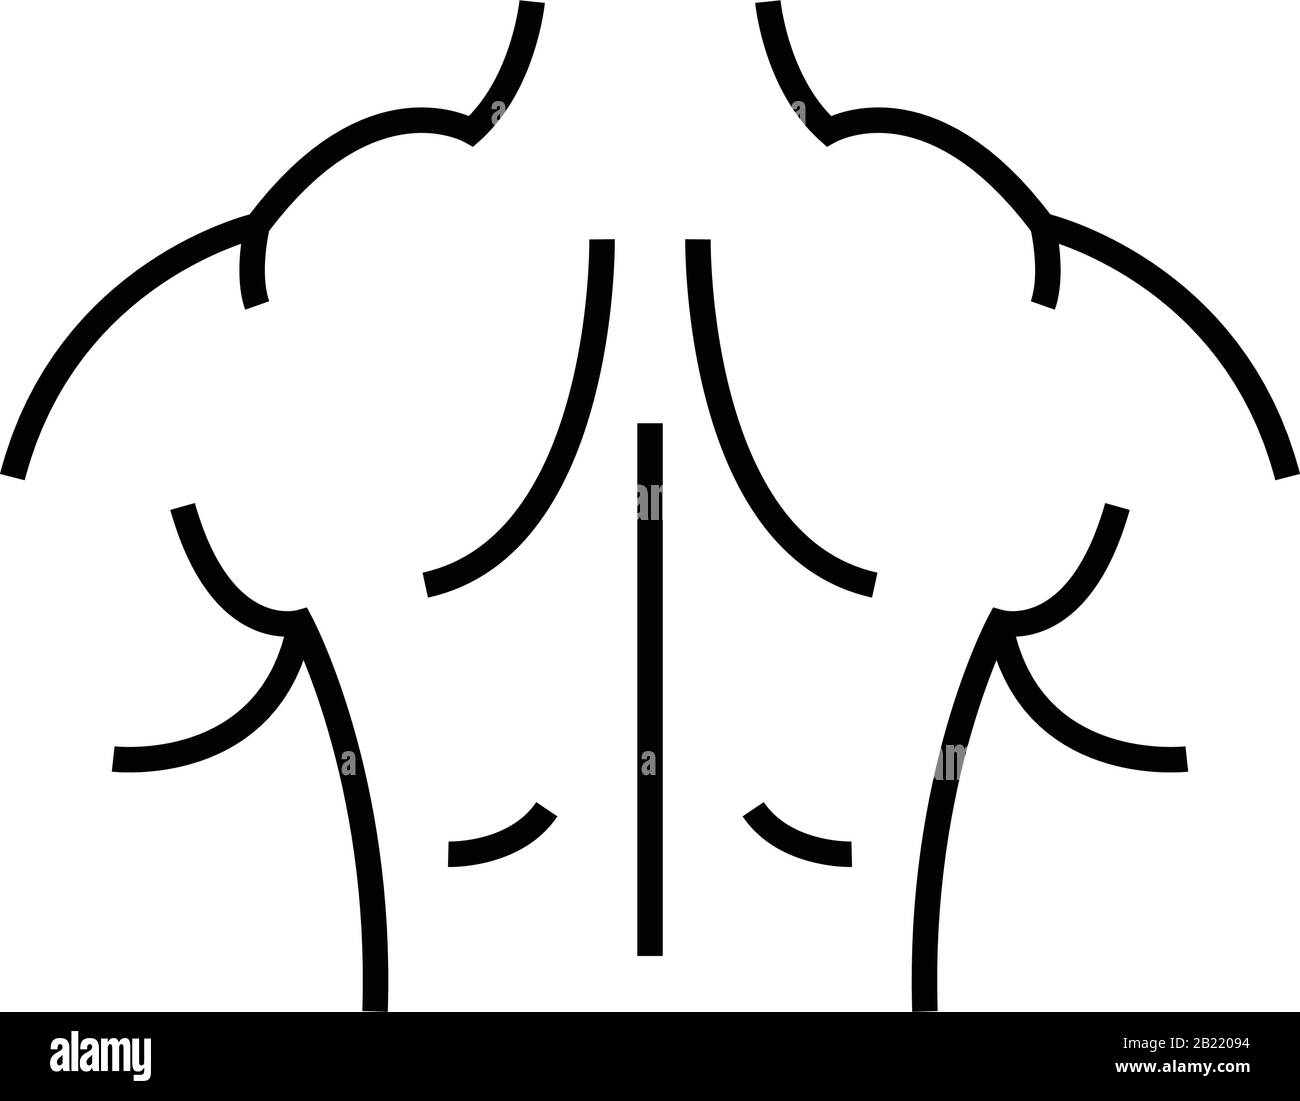 Muscular back line icon, concept sign, outline vector illustration, linear symbol. Stock Vector